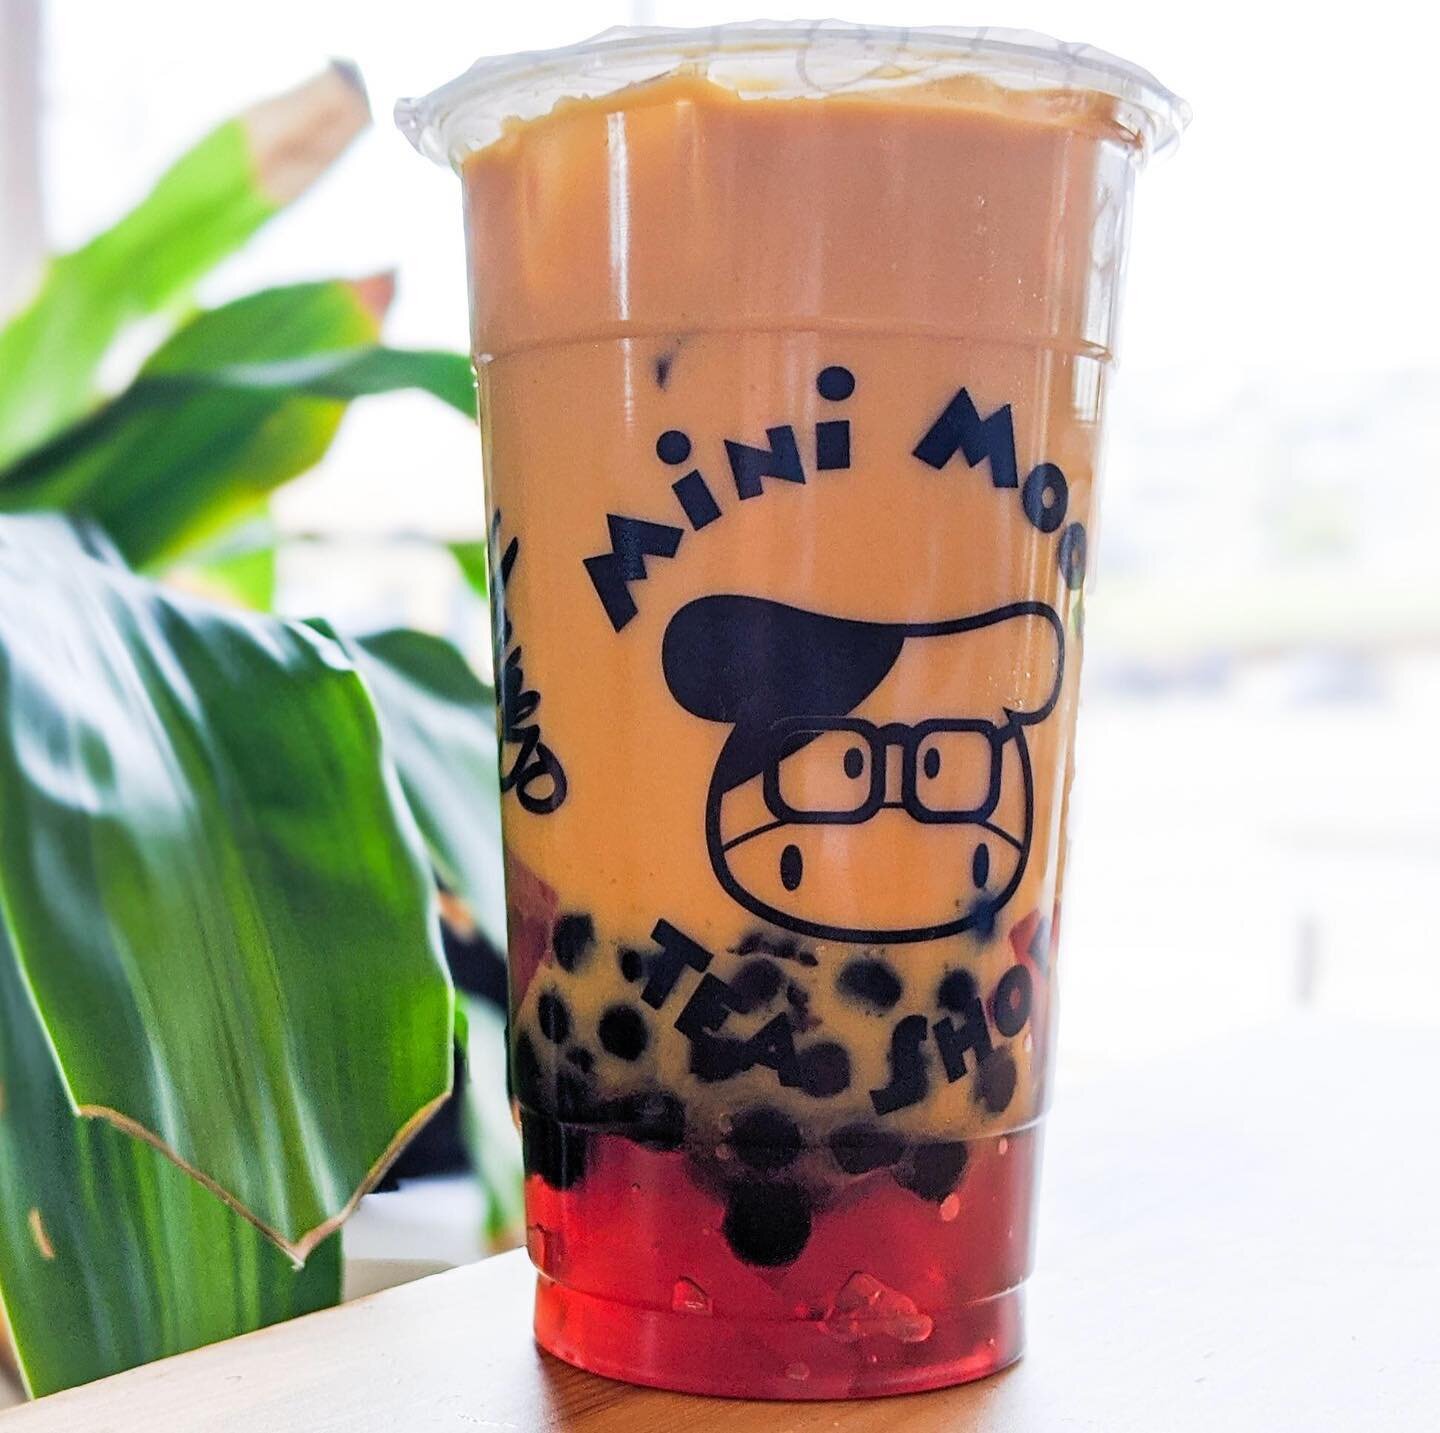 Happy Monday!! It&rsquo;s gloomy out, help brighten up that day with a refreshing drink! ☀️ 🍹.
.
.
Beginning next Monday, May 18th we will begin to extend our hours to 11:30am to 7:00pm - Still Drive Thru only.
.
.
#milktea #mangomilktea # boba #mon